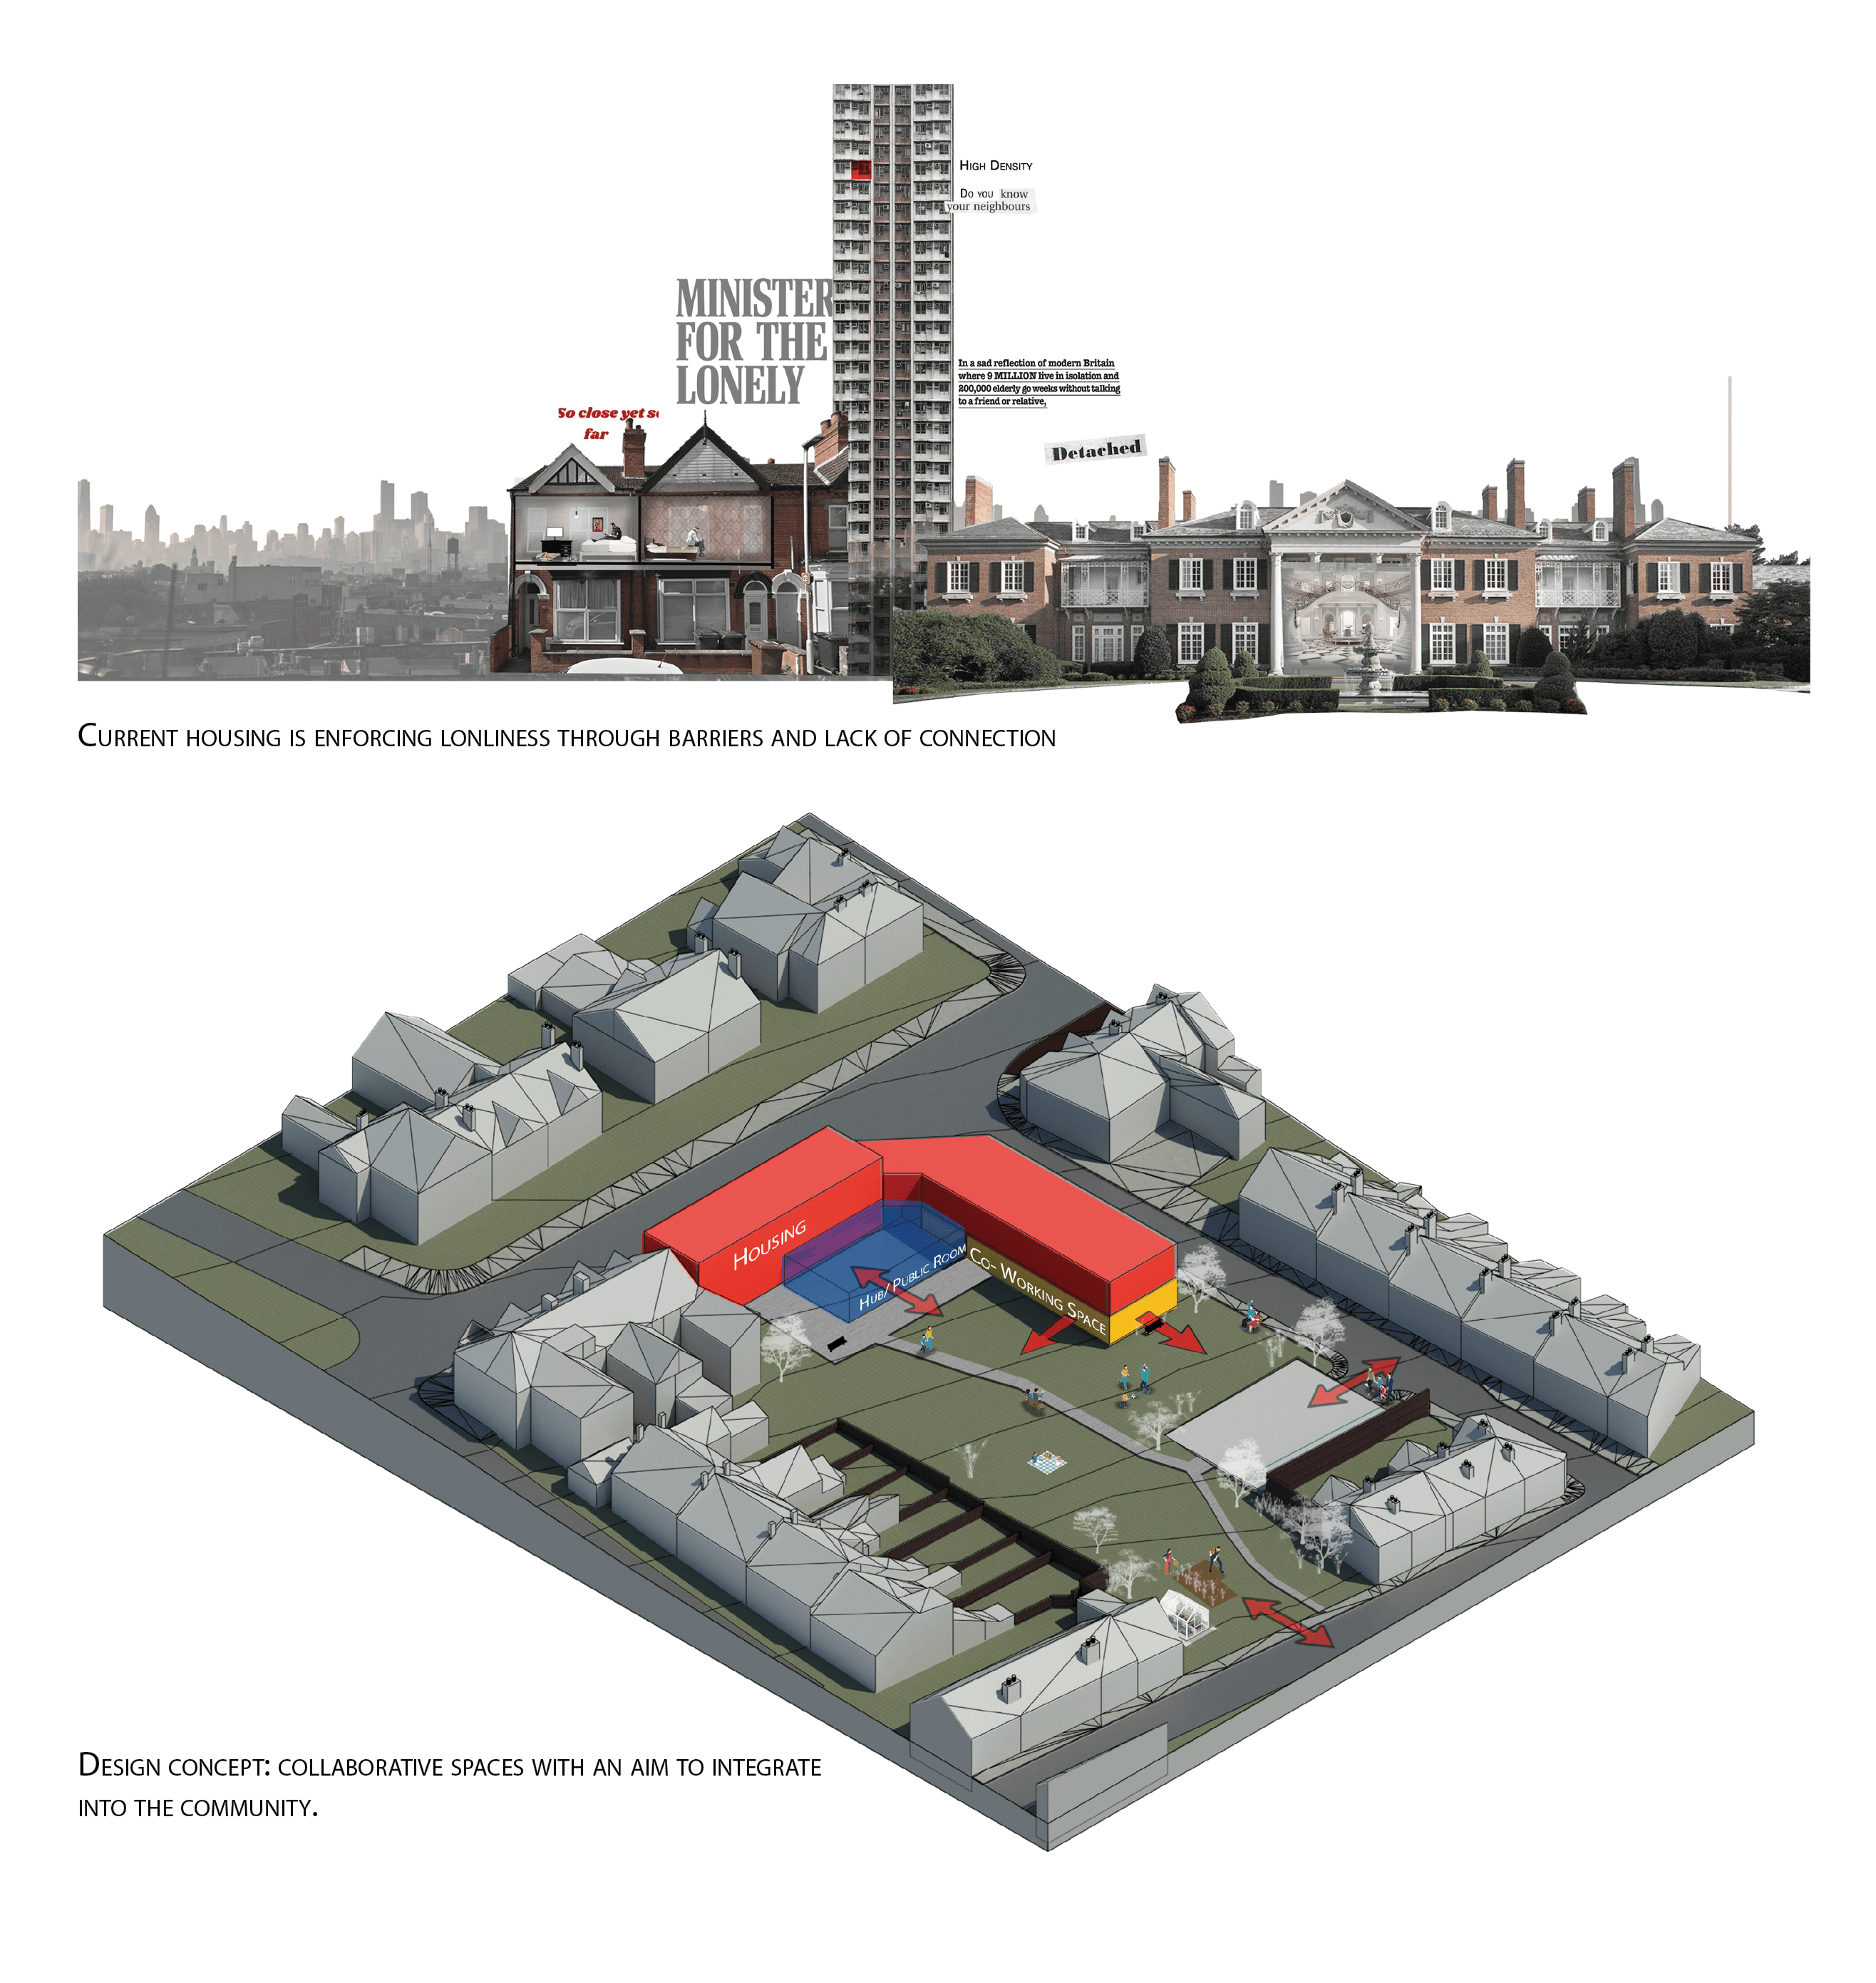 Cross section of a number of buildings include Grenfell Tower and a design concept depicting collaborative spaces.